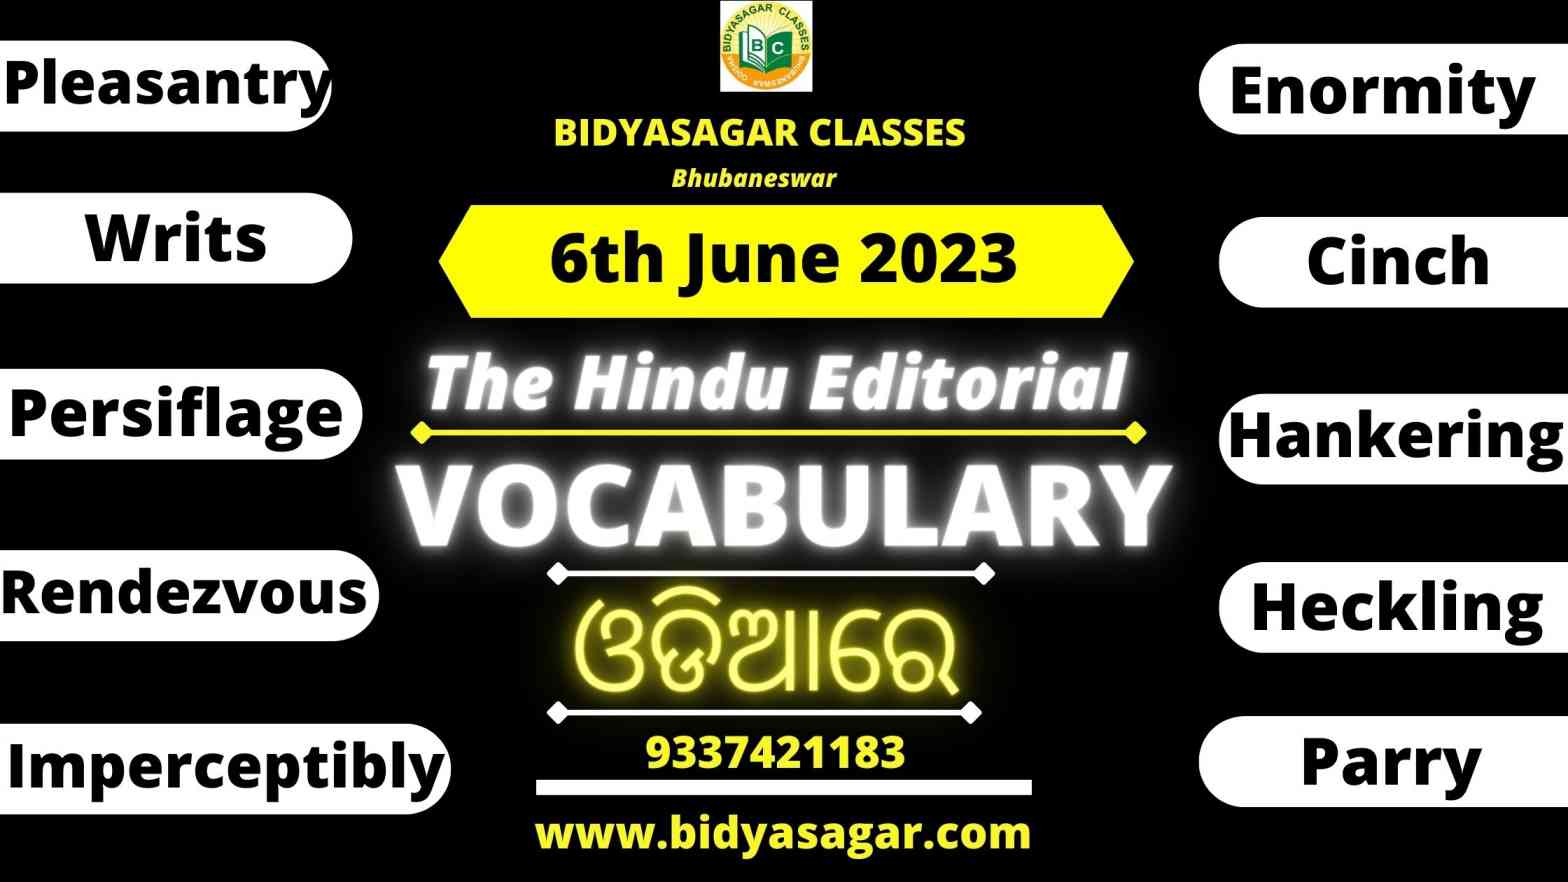 The Hindu Editorial Vocabulary of 6th June 2023